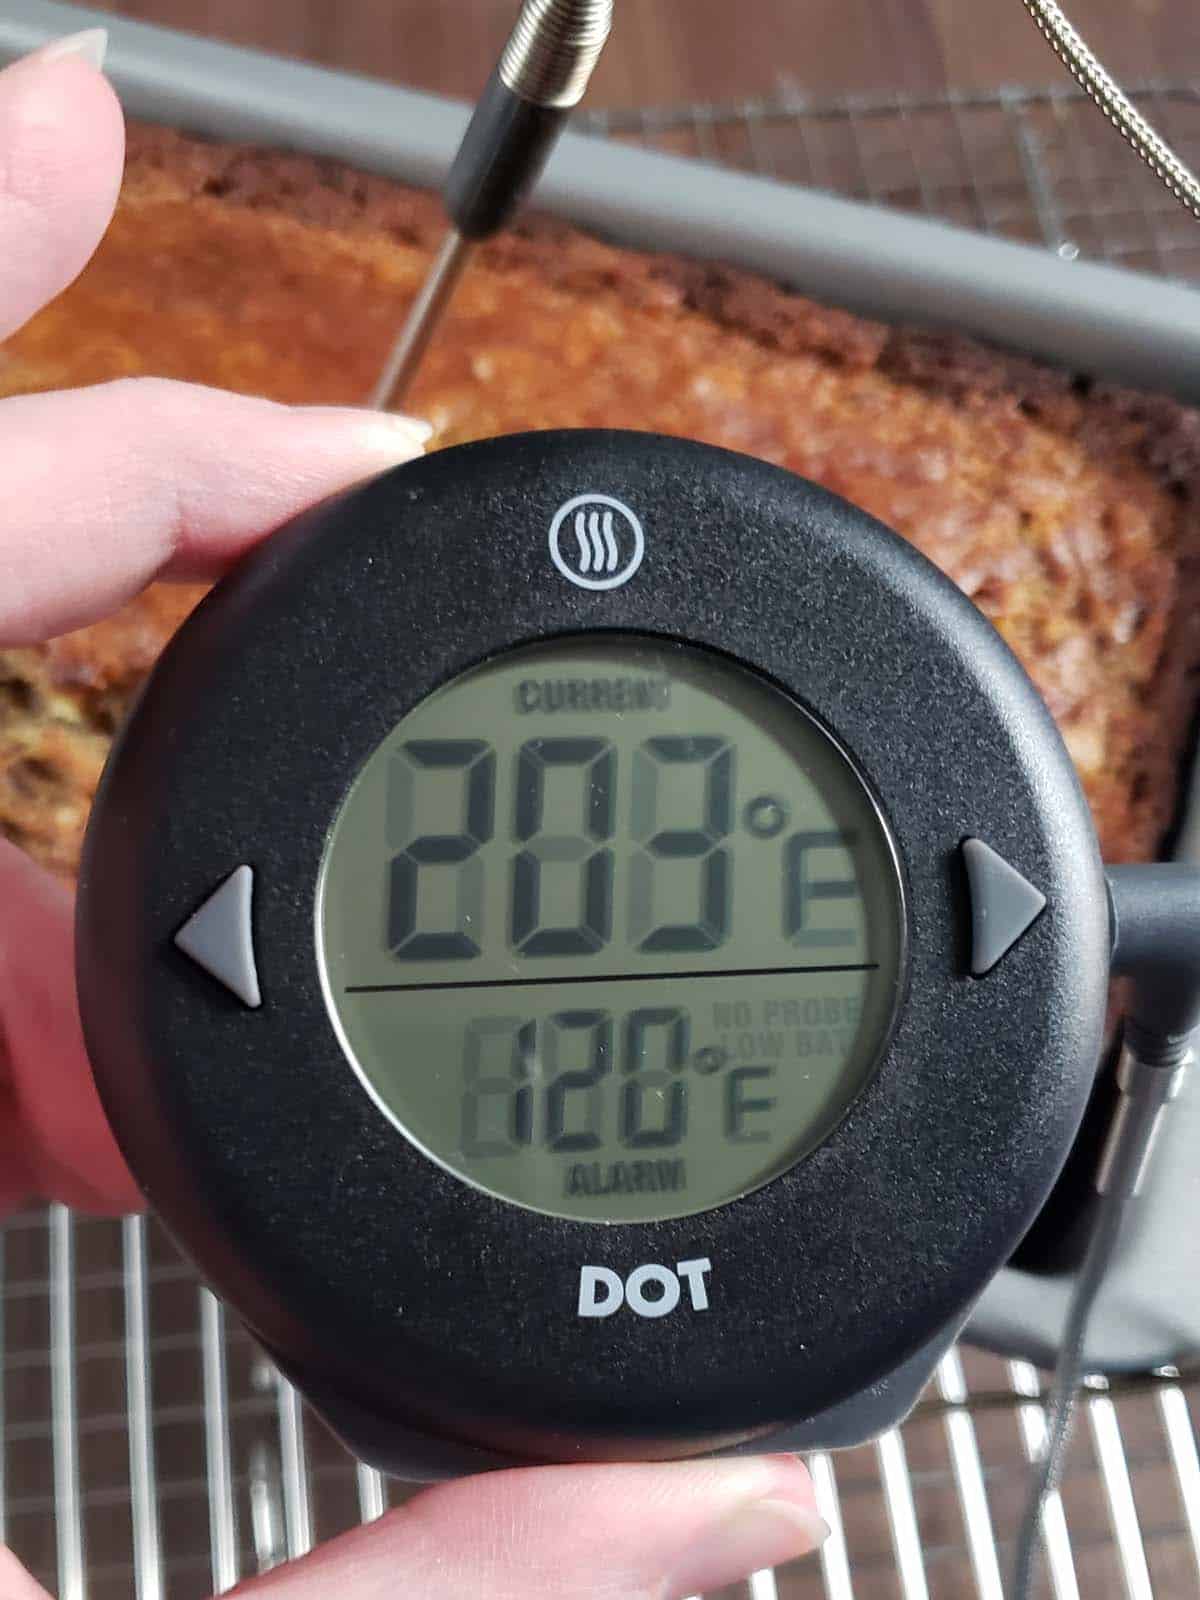 Digital thermometer displaying 203 degrees Fahrenheit.